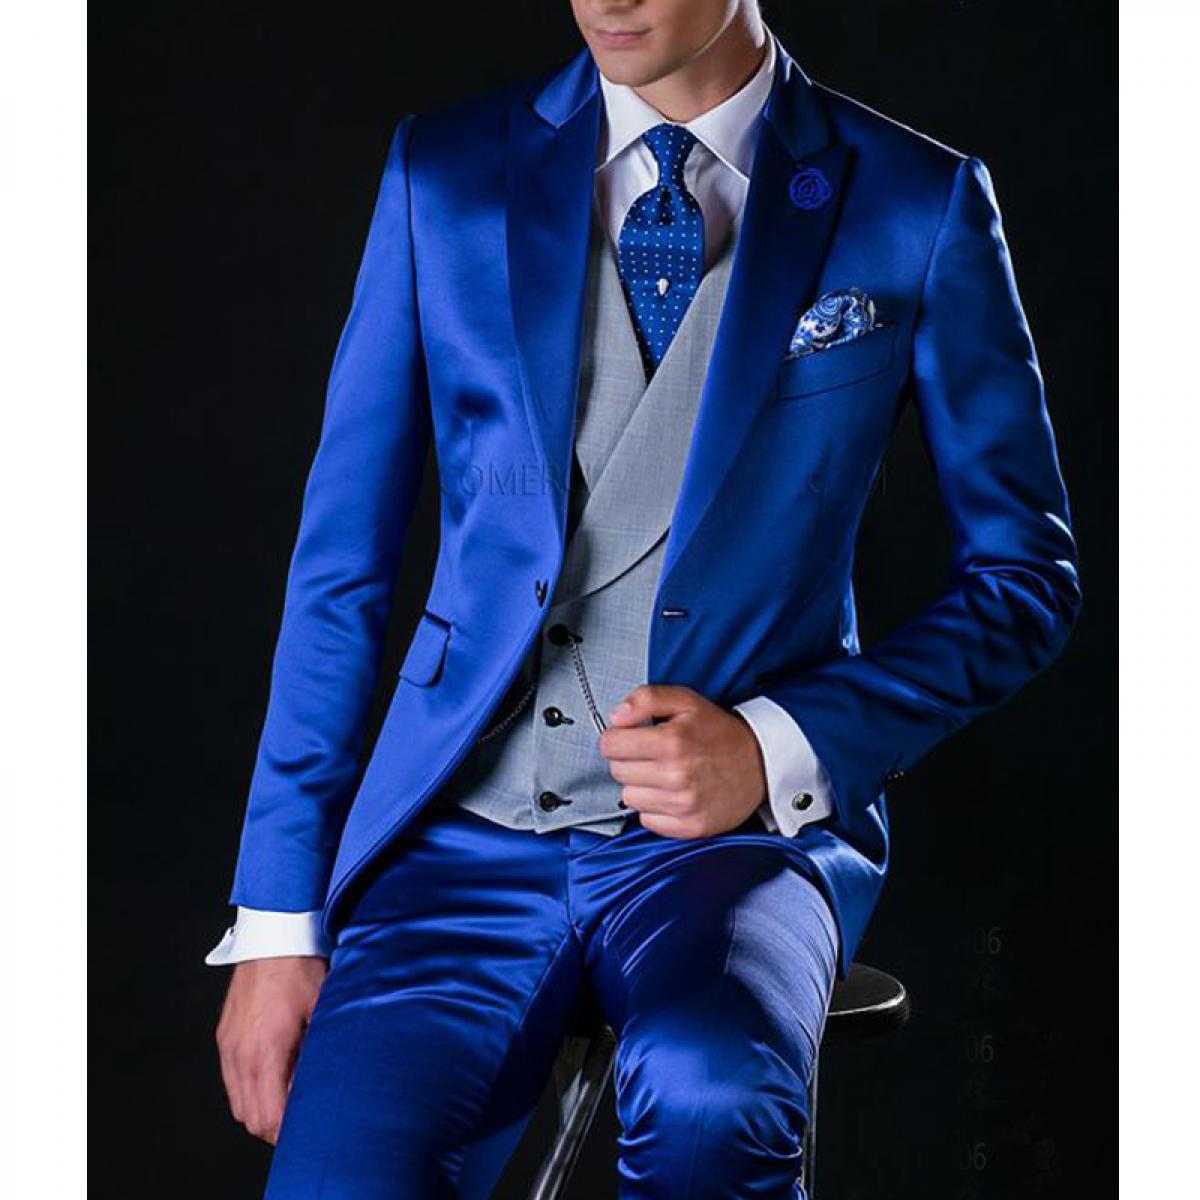 Royal Blue Satin Men Suits For Wedding With Gray Waistcoat Slim Fit Groom Tuxedos Male Fashion 3 Pieces (jacket+vest+pan